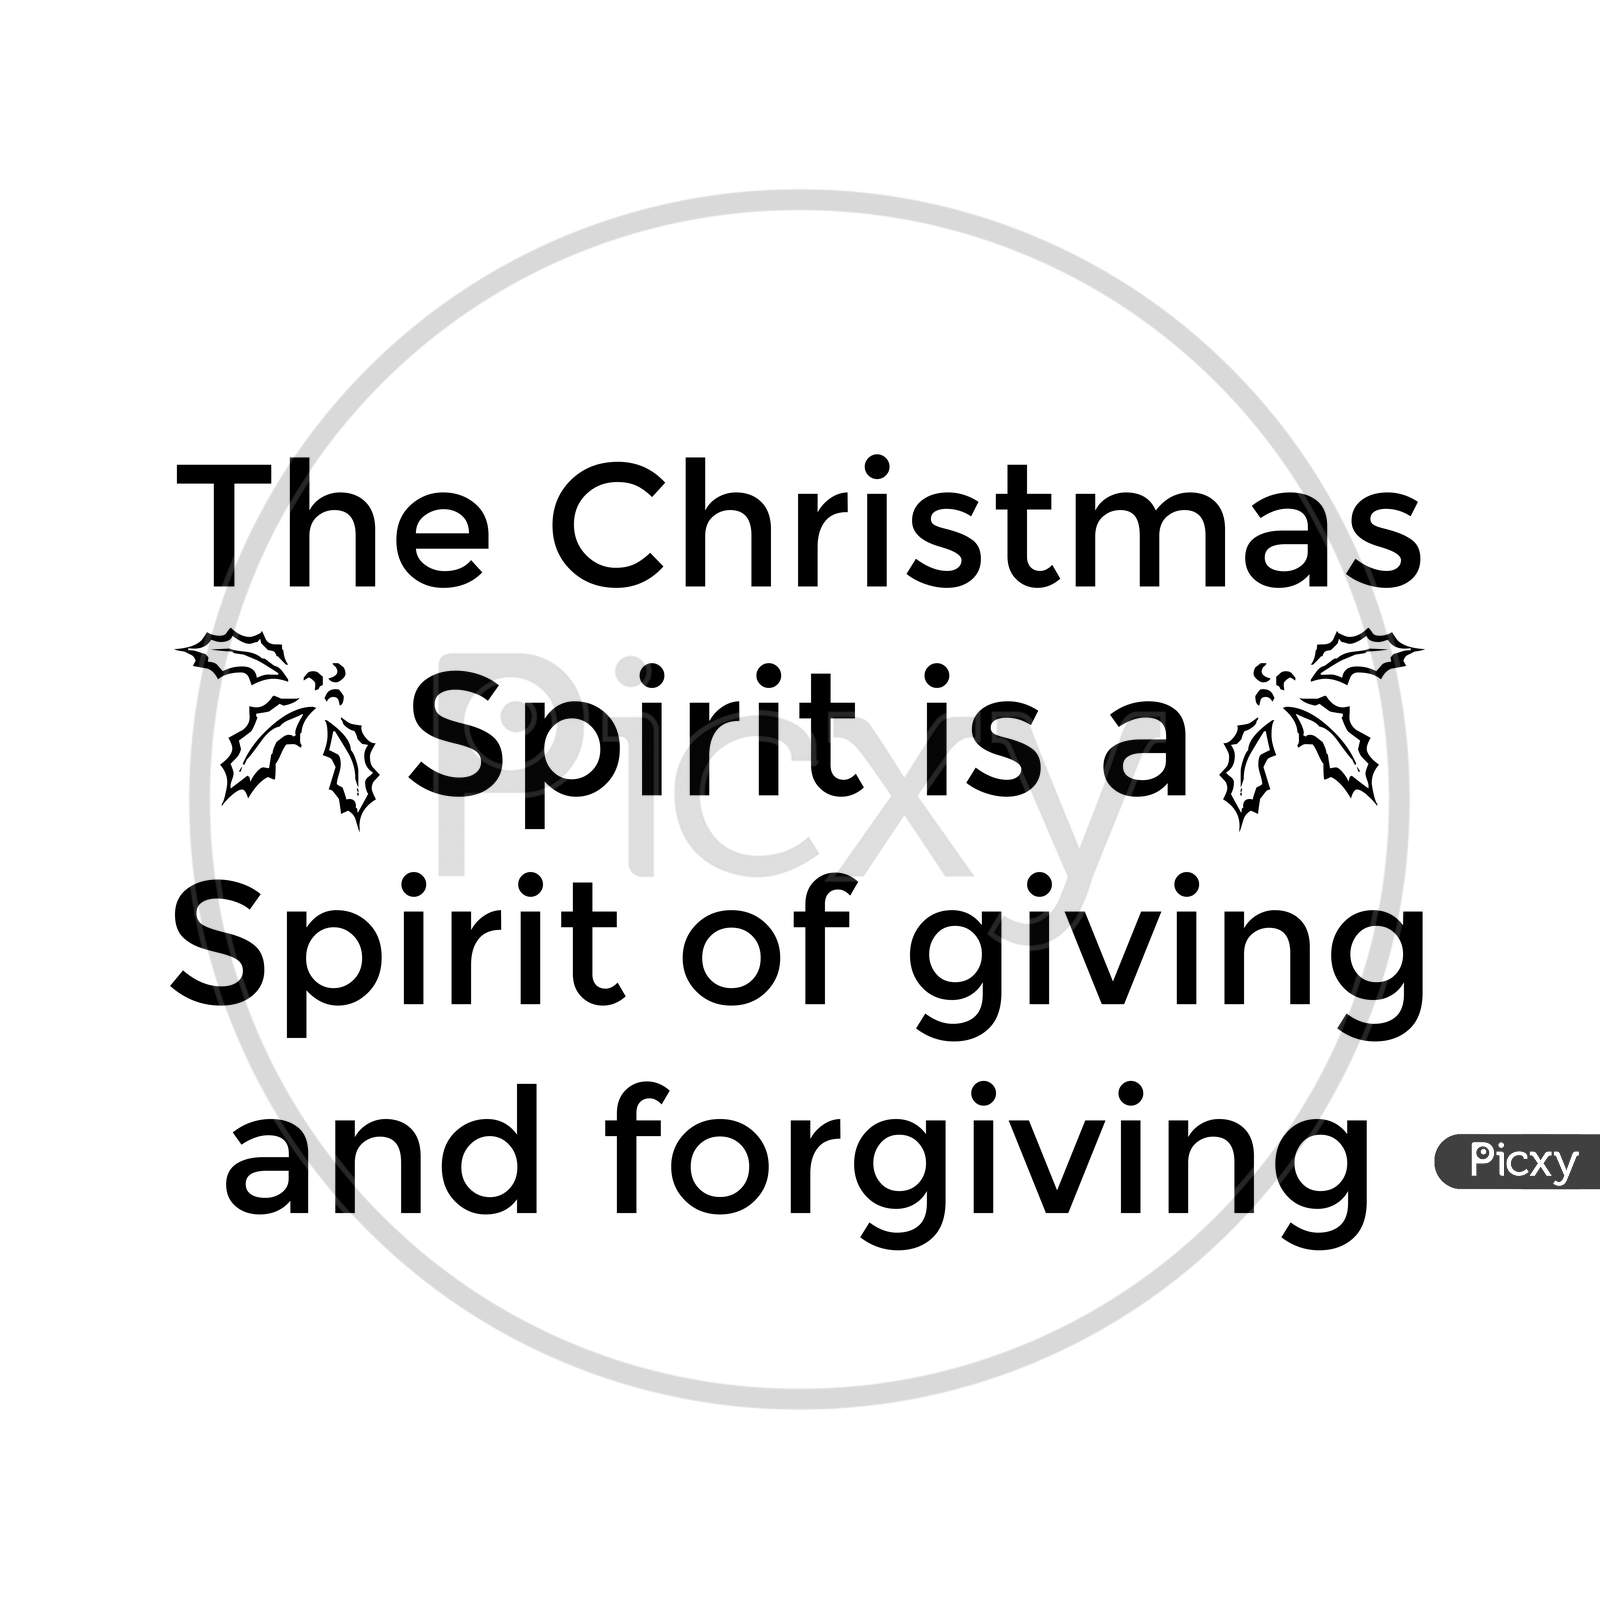 image-of-the-christmas-spirit-is-a-spirit-of-giving-and-forgiving